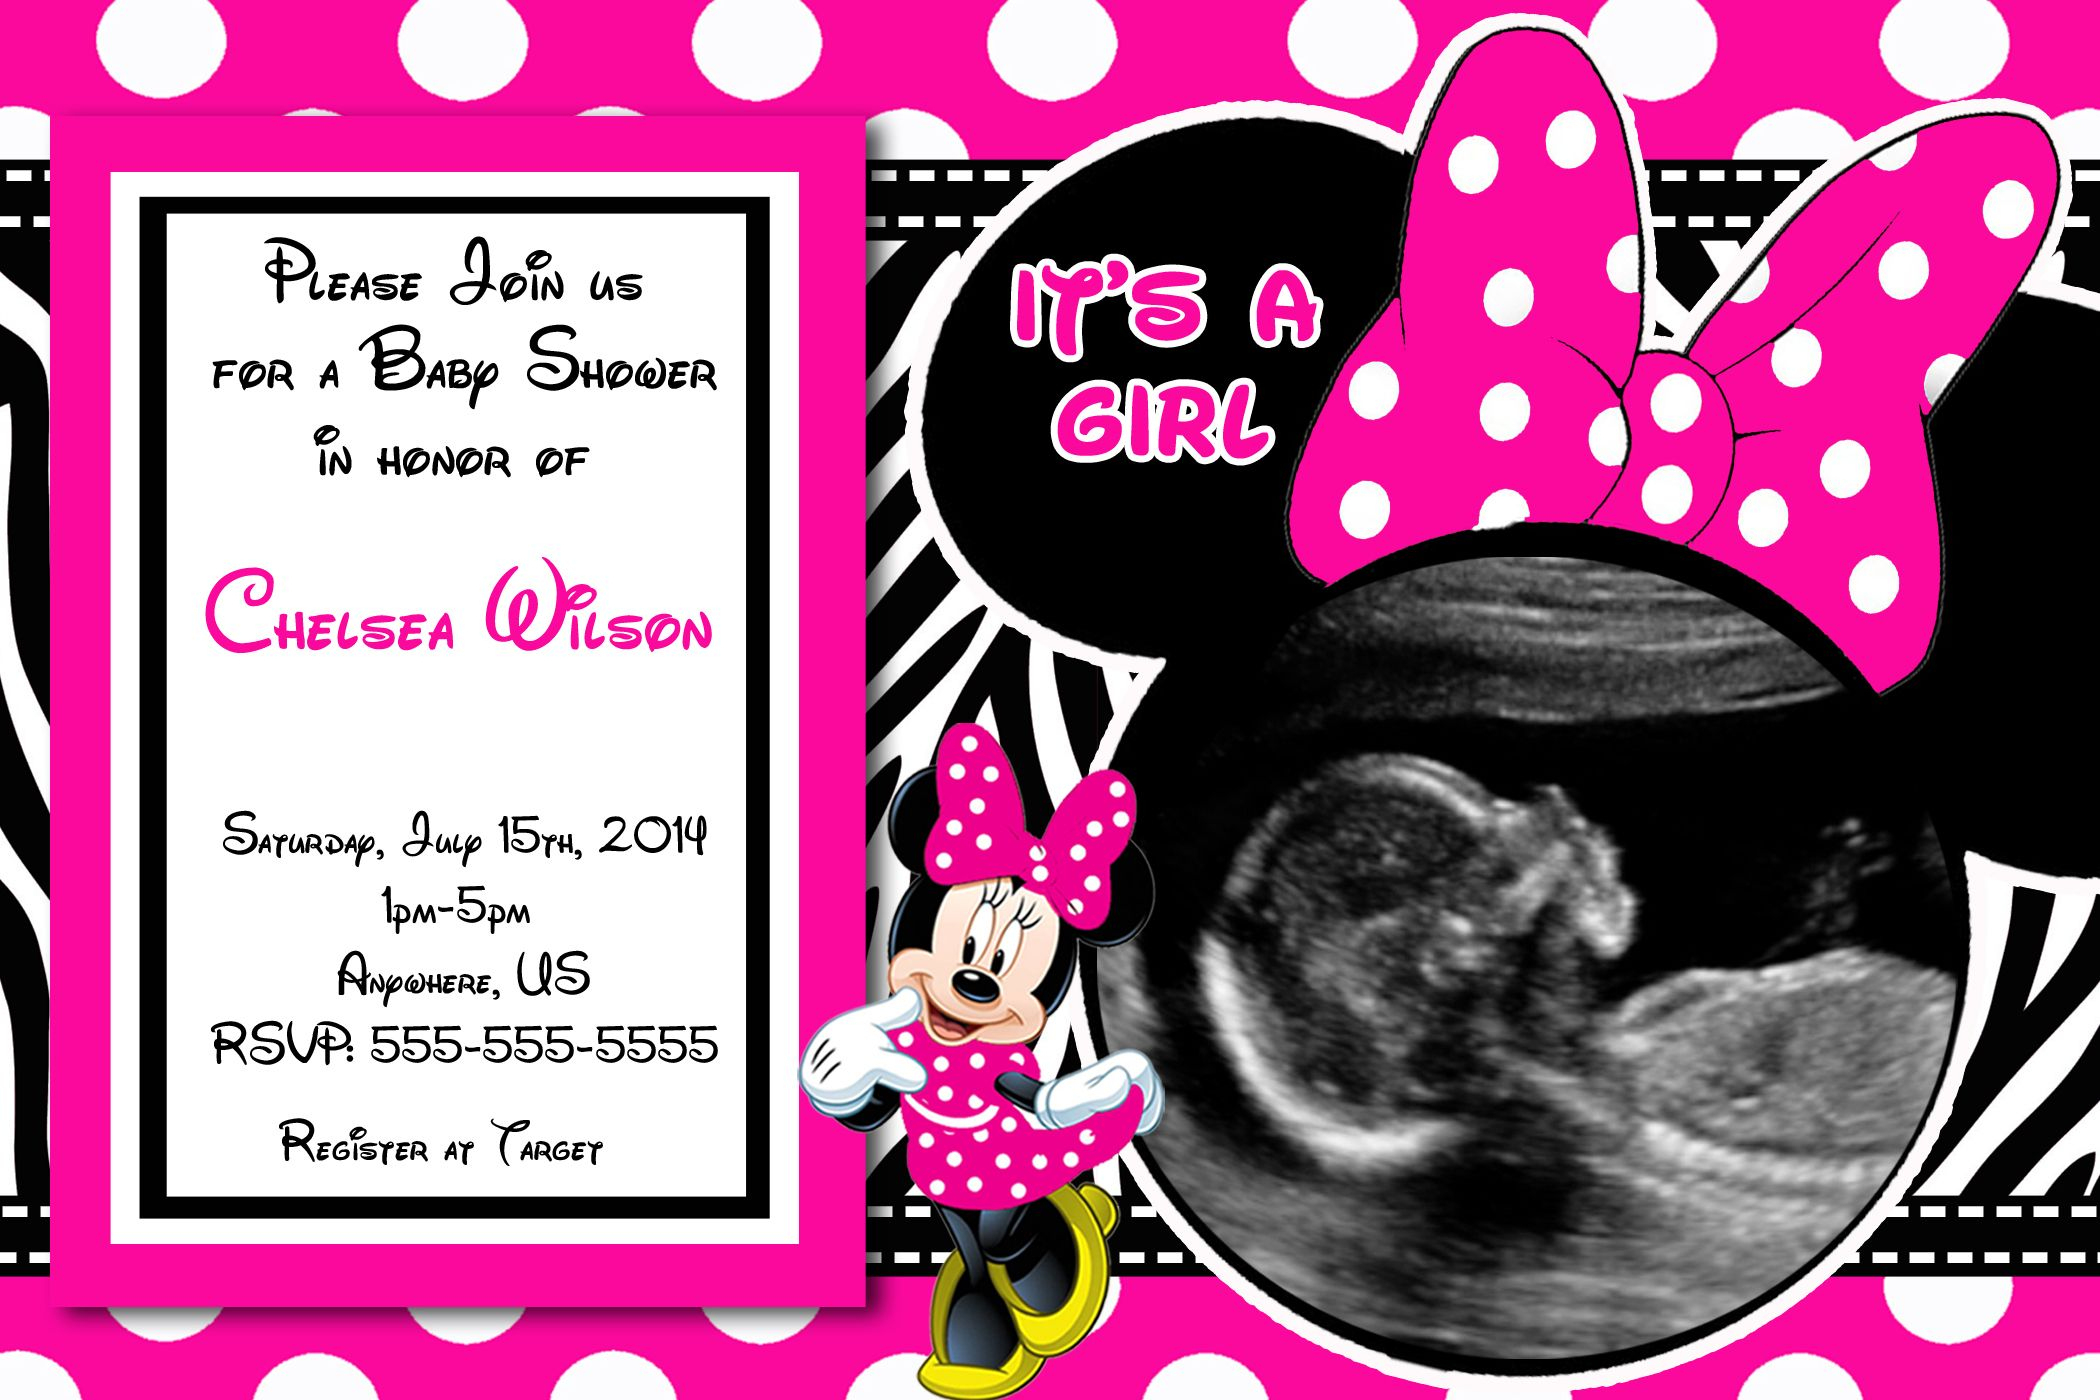 Hot Pink Minnie Mouse Baby Shower Invitations $8.99 | Baby Shower - Free Printable Minnie Mouse Baby Shower Invitations